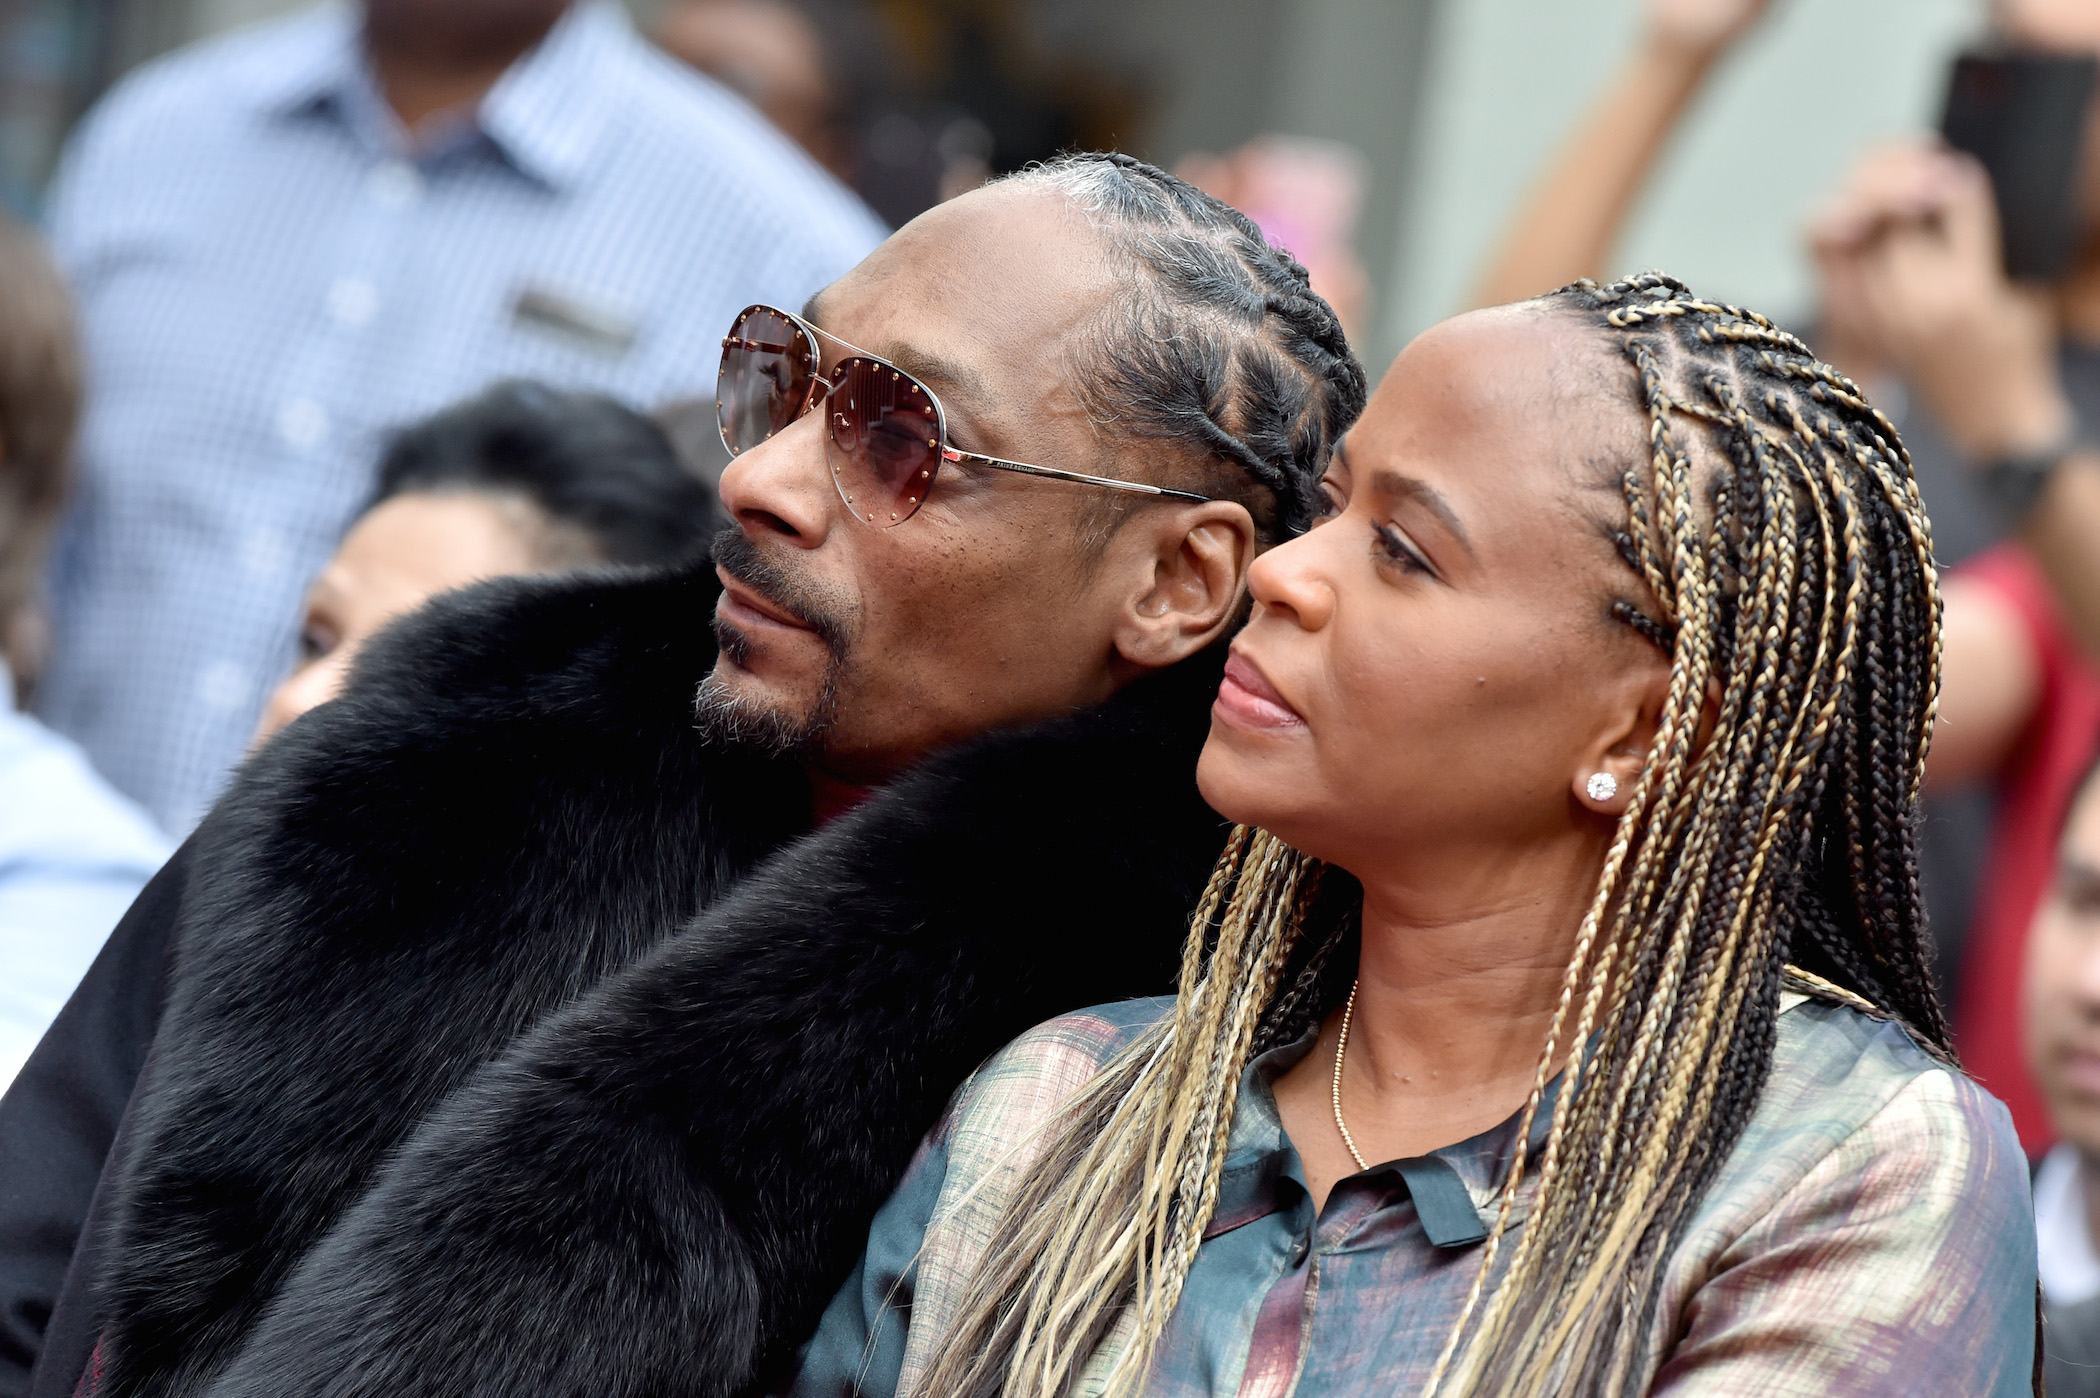 What Is Snoop Dogg's Age, and Is He Older Than His Wife, Shante Broadus?